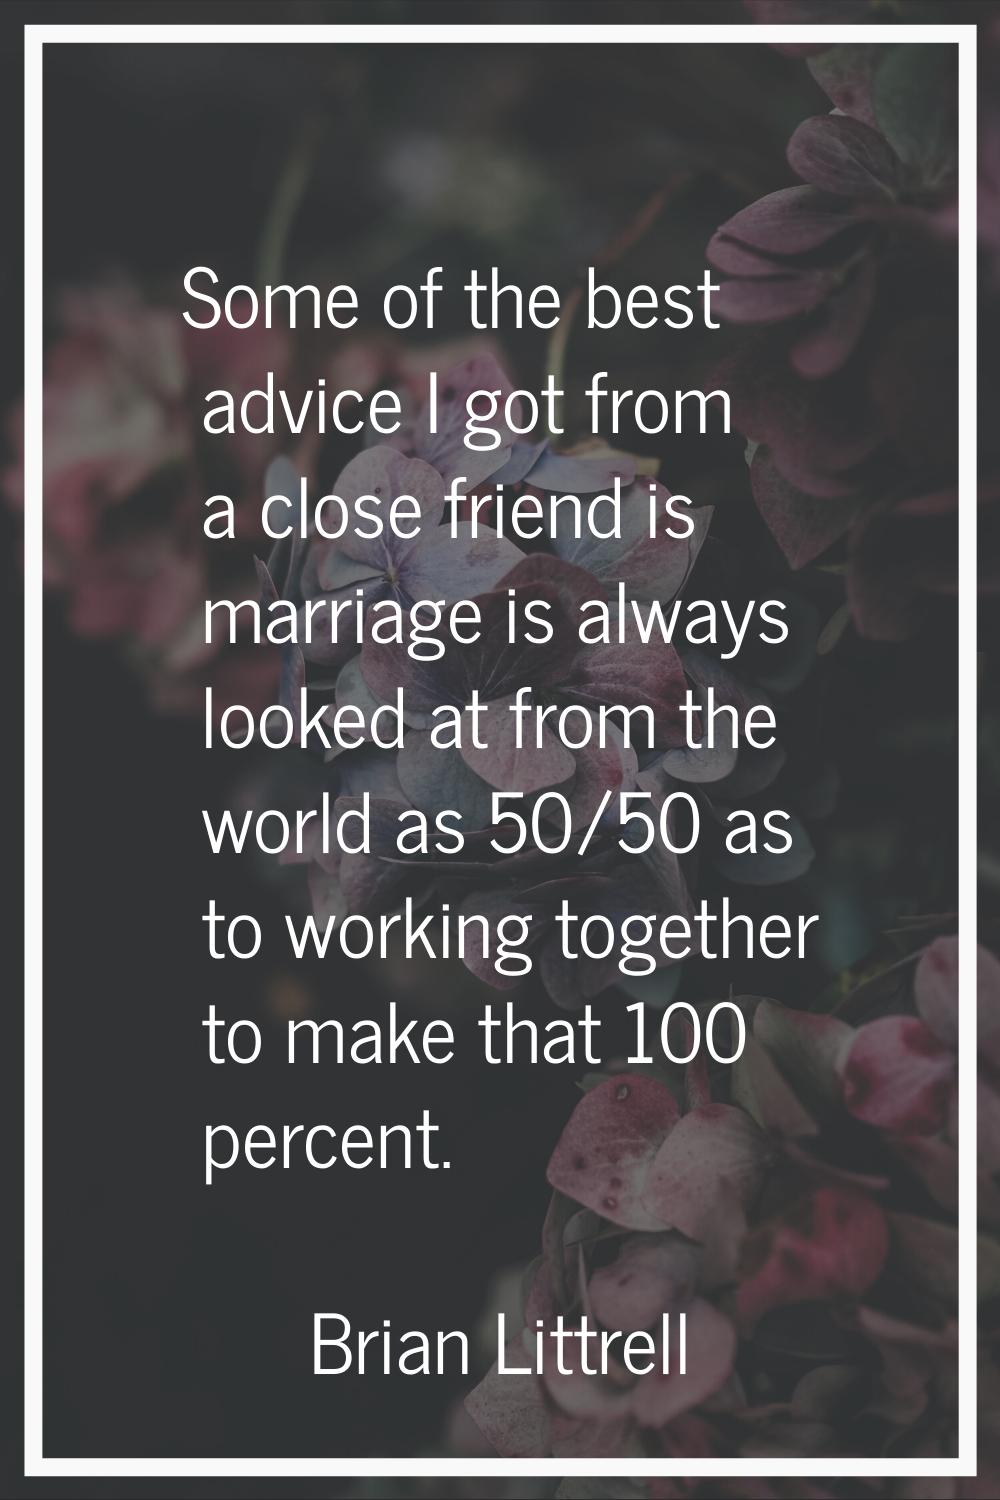 Some of the best advice I got from a close friend is marriage is always looked at from the world as